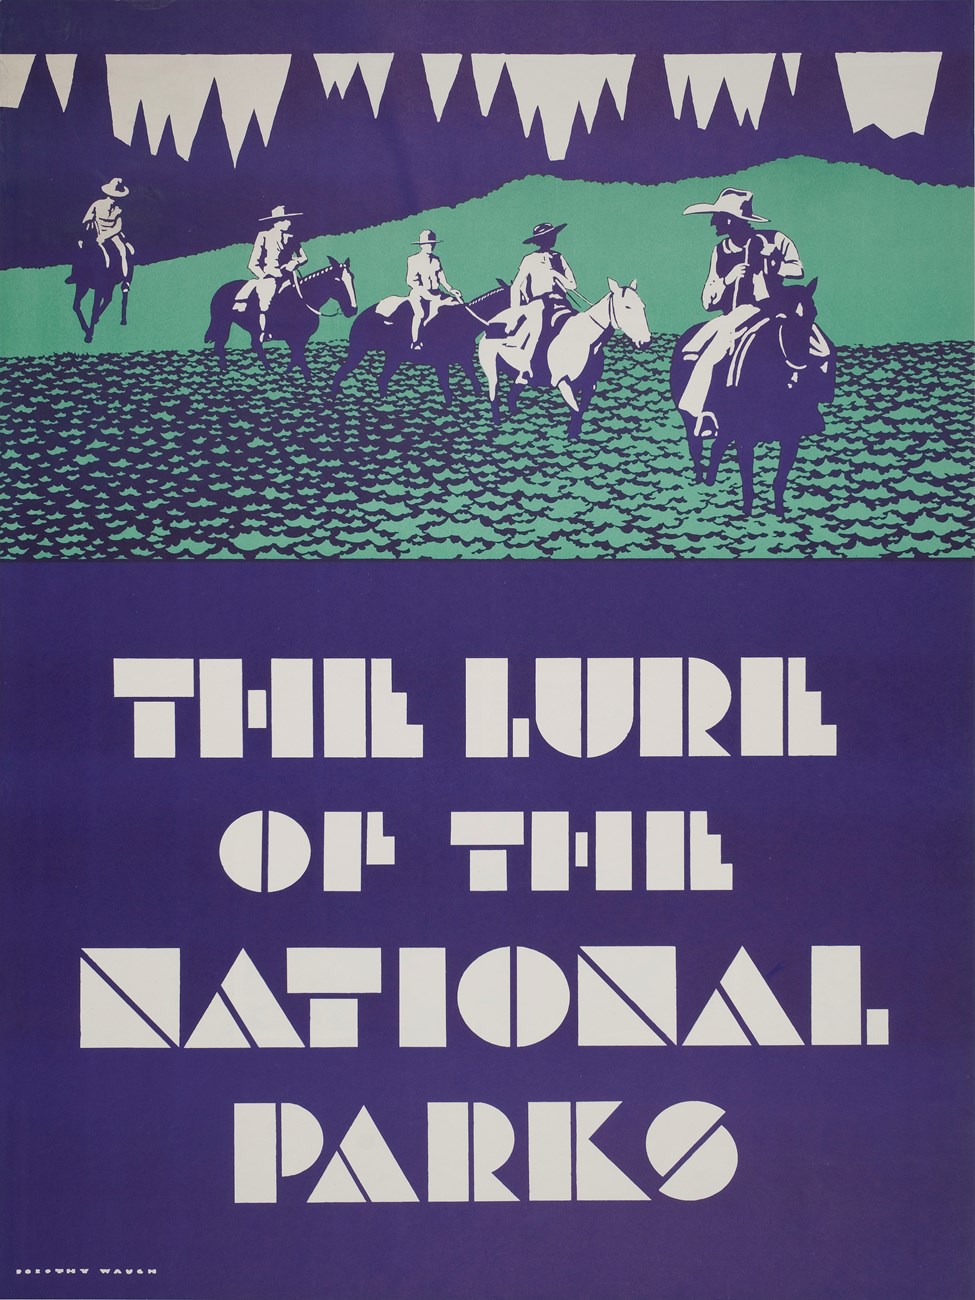 Blue poster featuring men on horseback riding on a green field. "The Lure of the National Parks" is written in large white letters on the bottom of the poster.